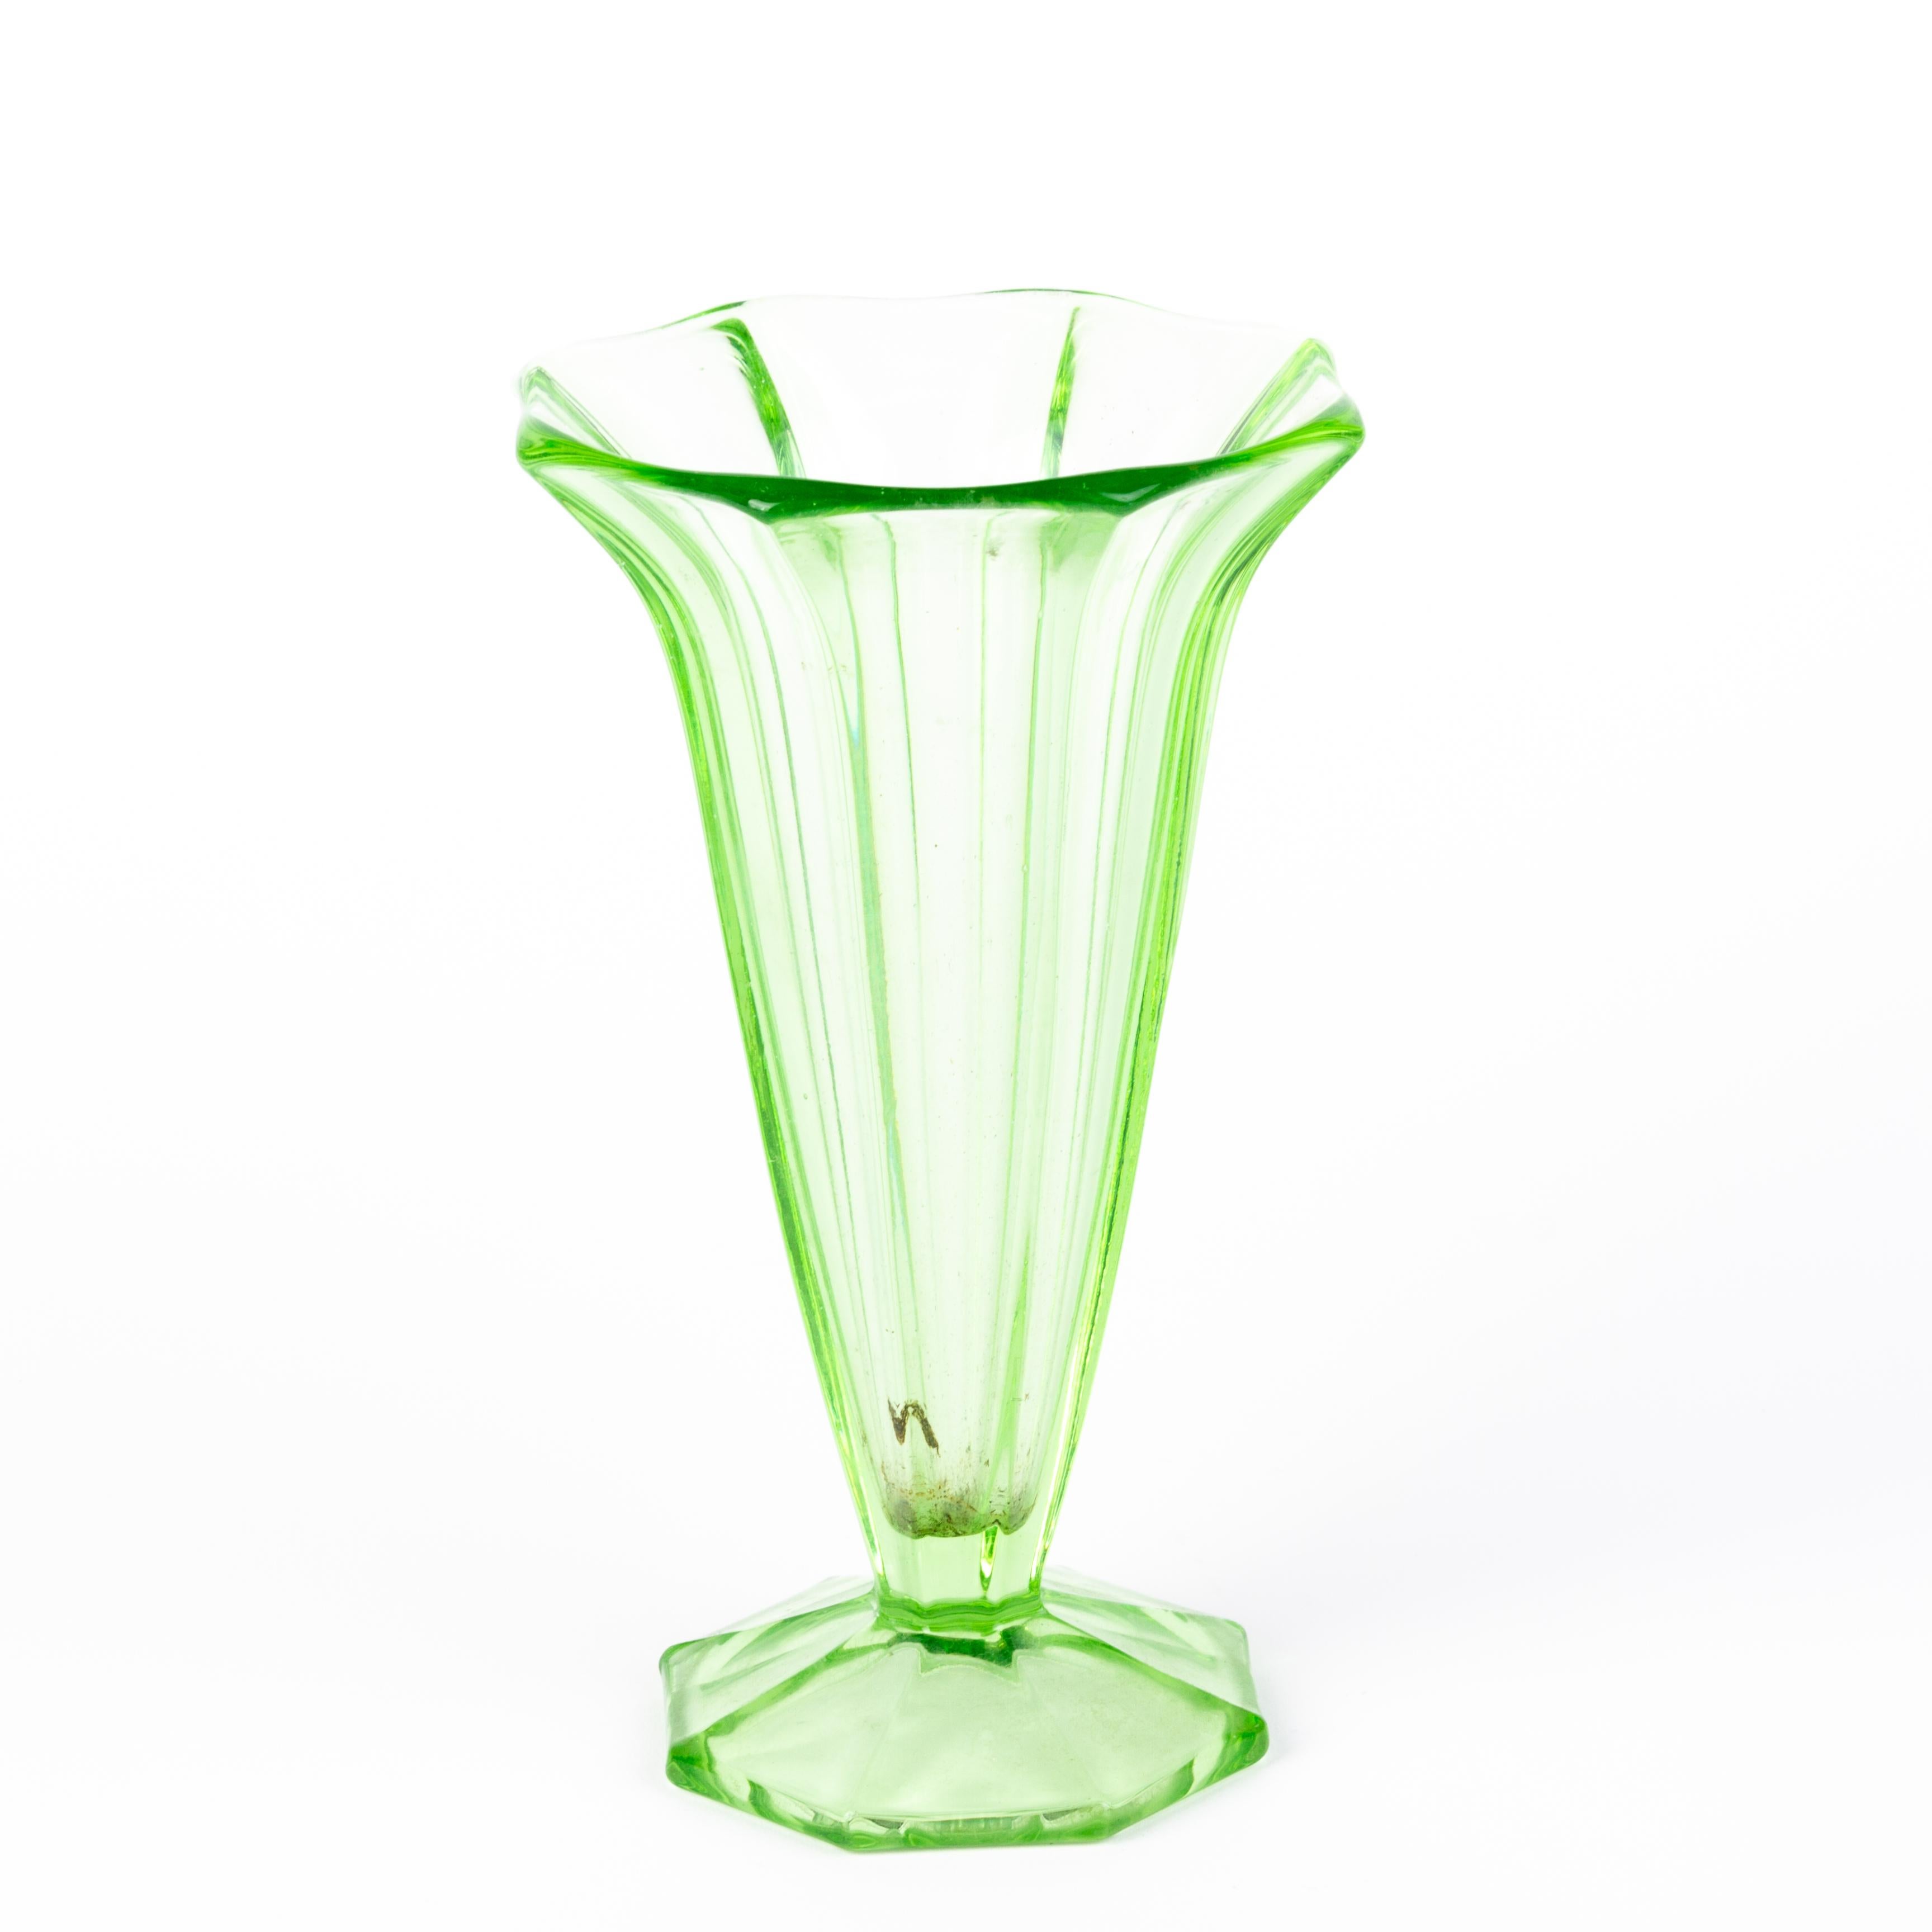 Art Deco Uranium Glass Fluted Vase 1930s
Good condition
From a private collection.
Free international shipping.